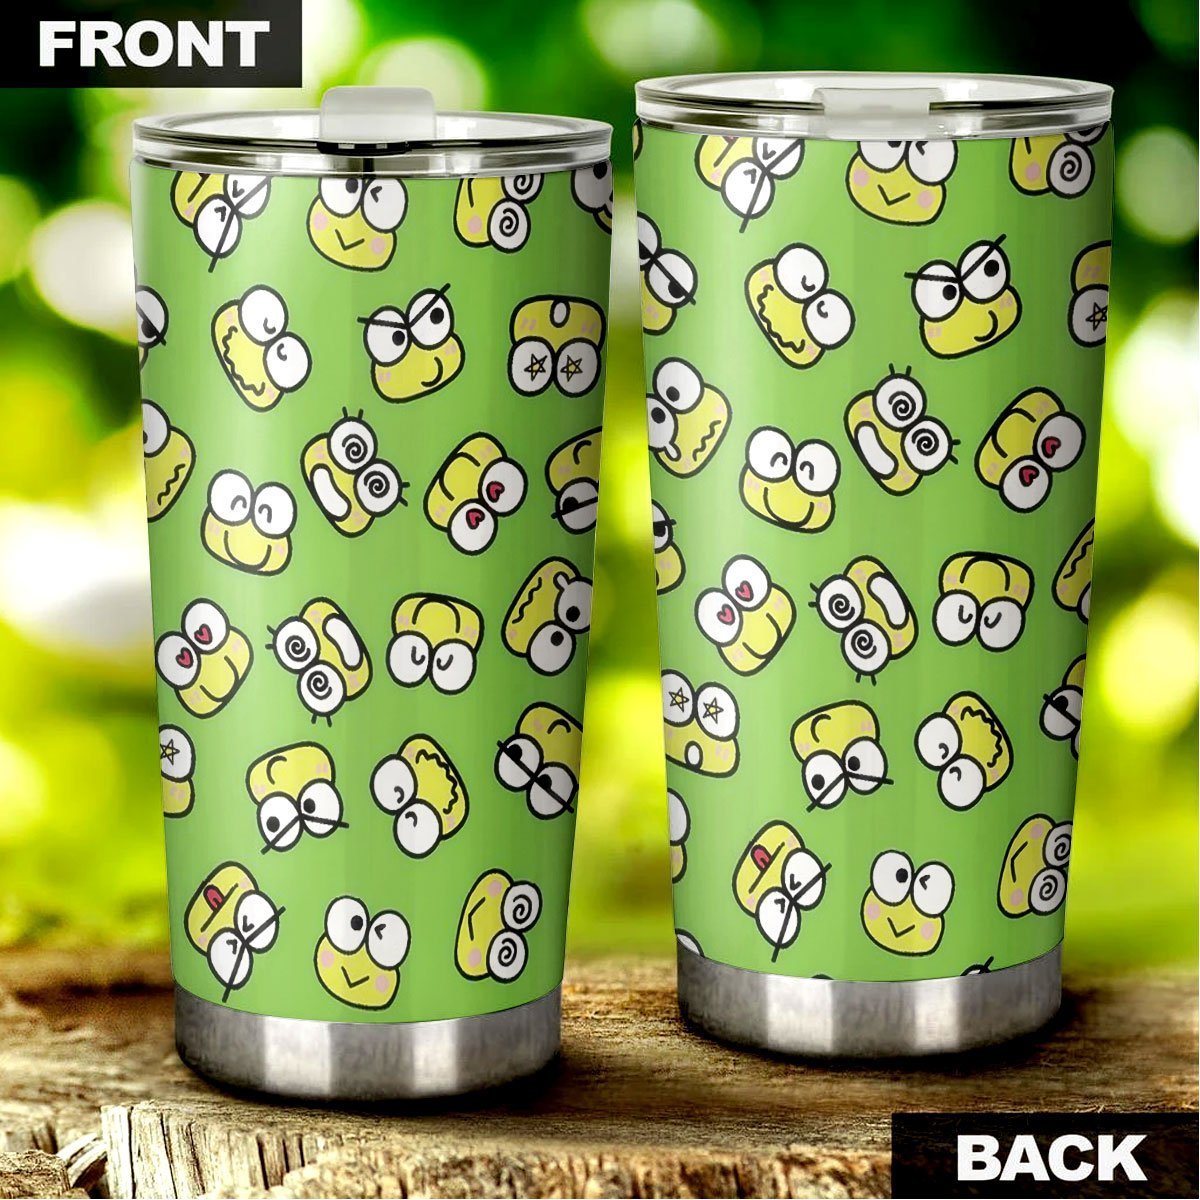 Cute Emotional Face Of Frog Tumbler Stainless Steel - Gearcarcover - 2